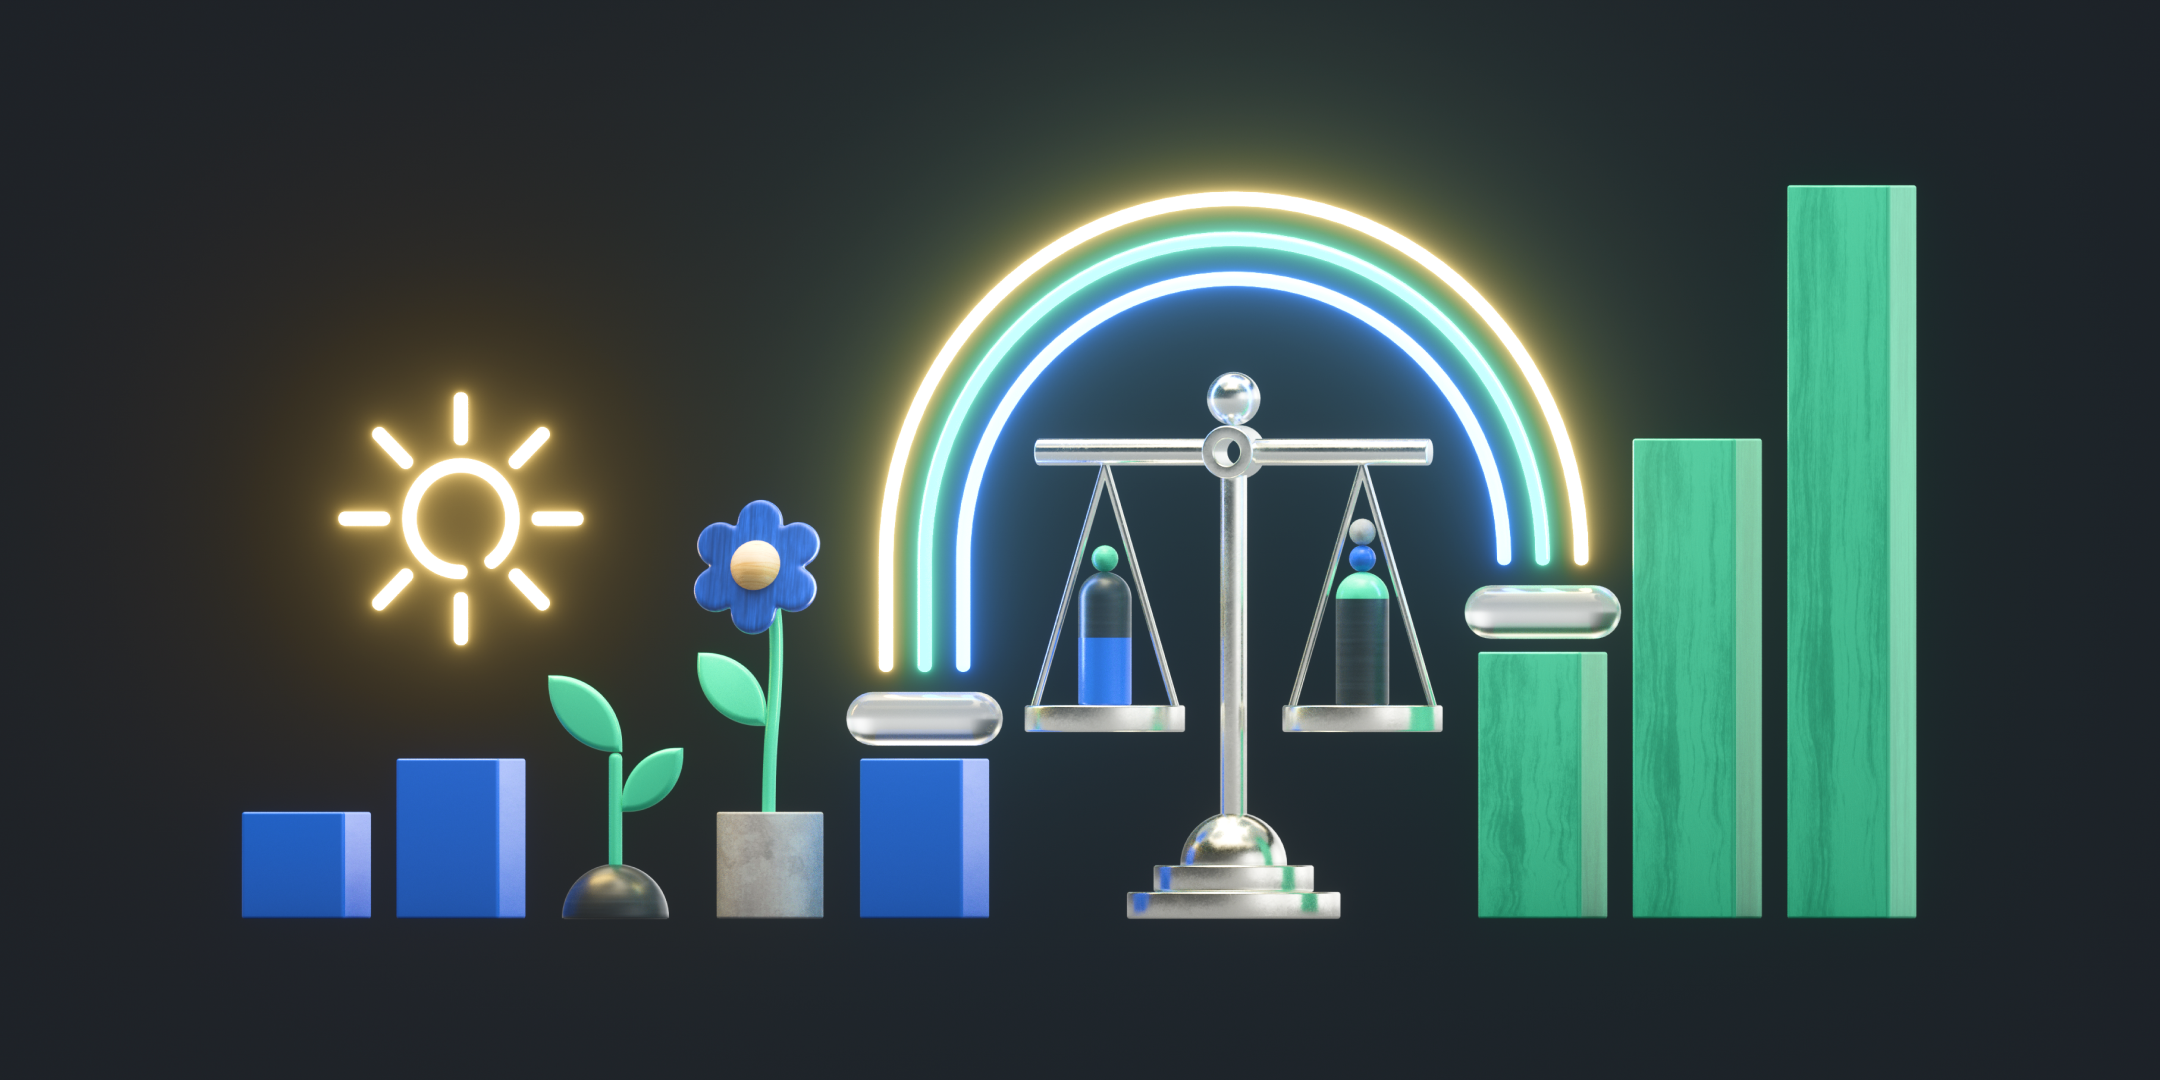 A three-dimensional illustration of a bar graph with plants and a scale, rendered with neon elements.